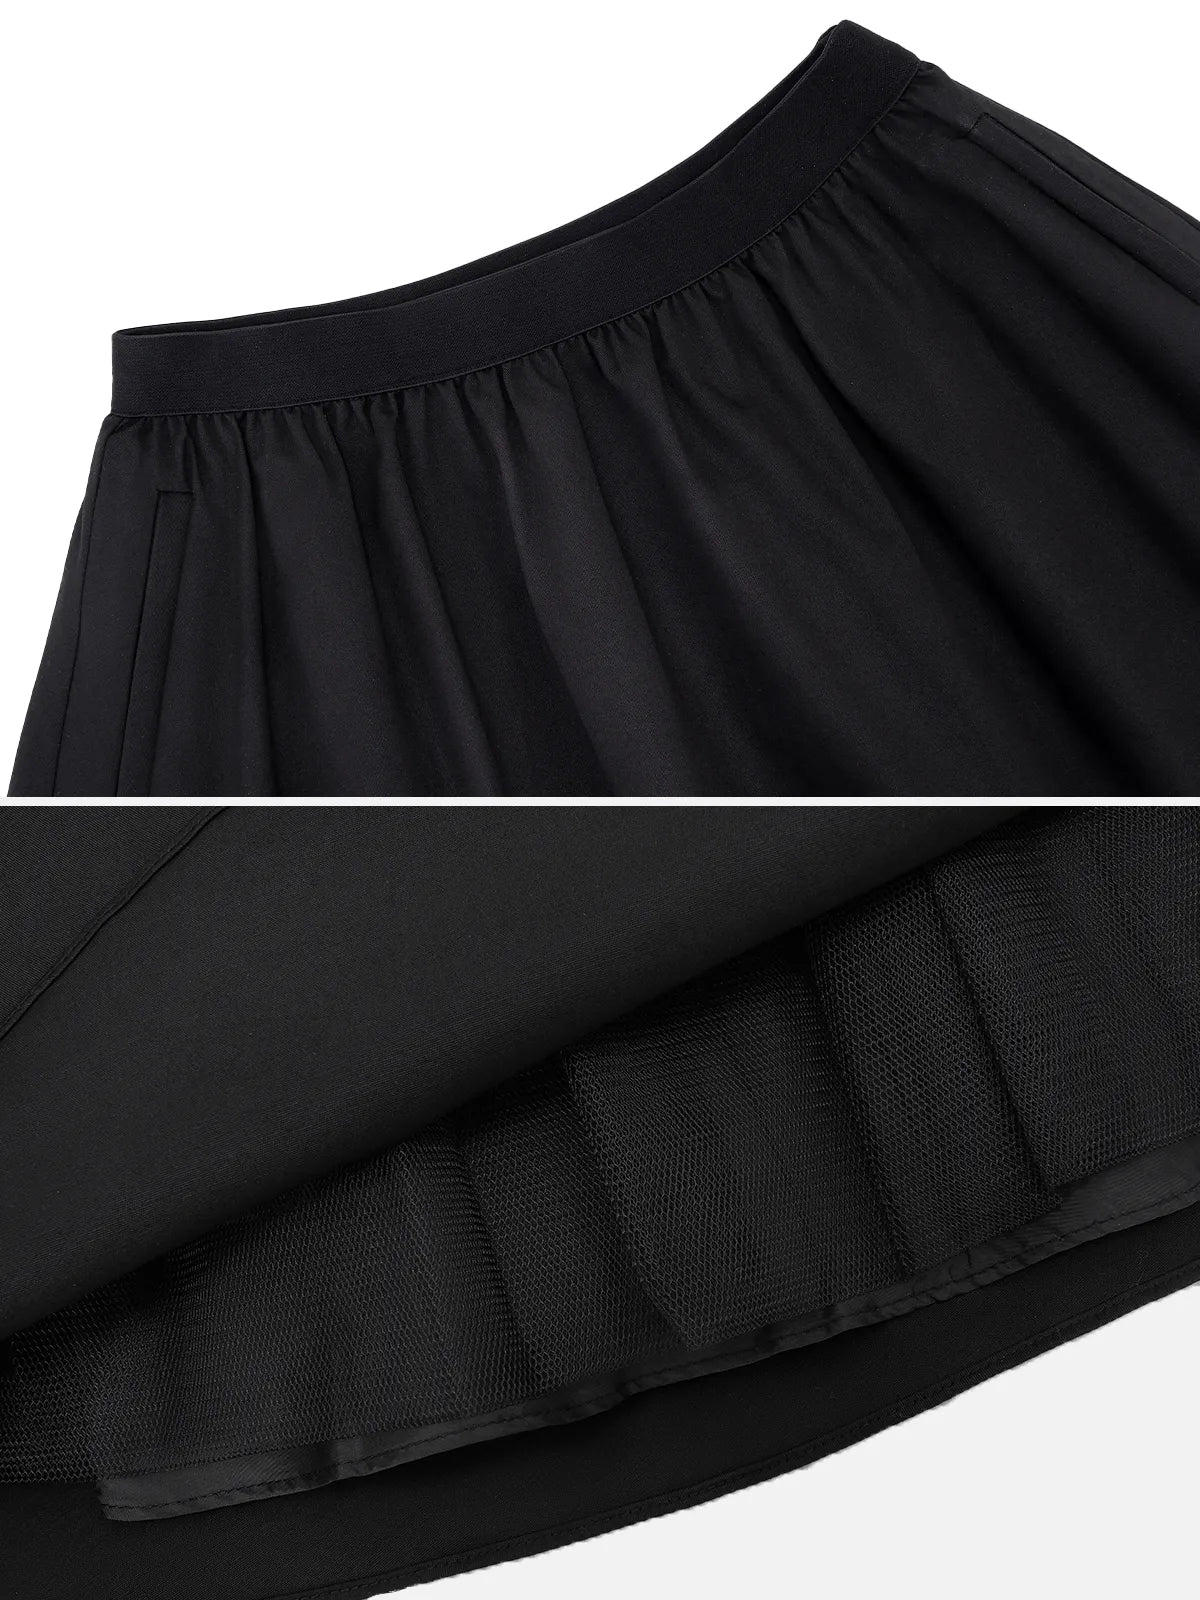 Women's black skirt with a tasteful mid-length design, combining modest coverage and stylish allure